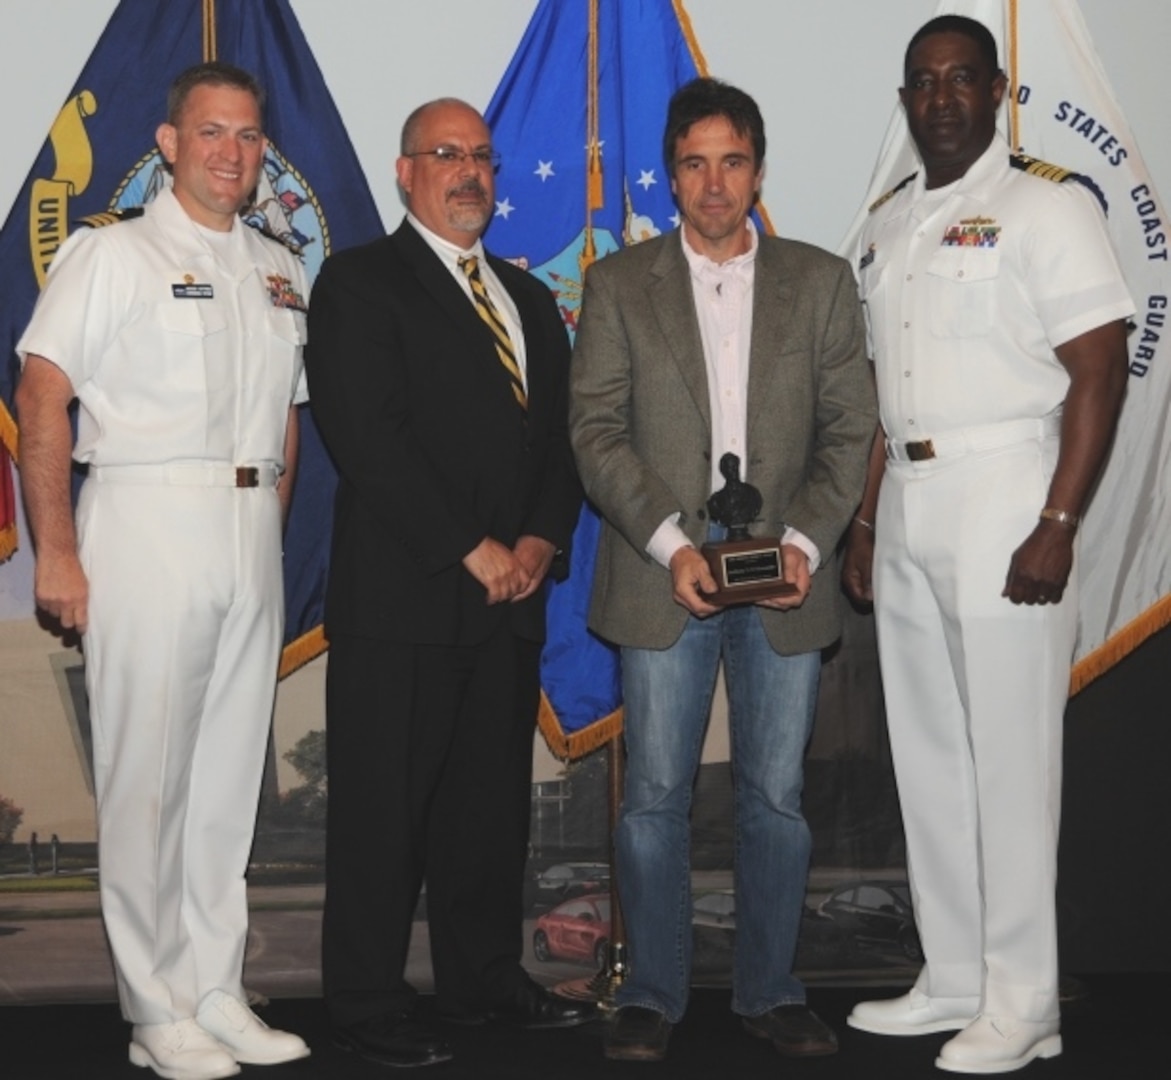 DAHLGREN, Va. (May 17, 2017) - Anthony D'Alessandro holds  the John Adolphus Dahlgren Award moments after receiving it from Naval Surface Warfare Center Dahlgren Division (NSWCDD) leadership at the command's annual honor awards ceremony. D'Alessandro was recognized for the crucial role he played in establishing NSWCDD as the undisputed leader for government designed and developed fire control systems. "Mr. D'Alessandro was a 'founding father' in the architecture and development of the MK 160 Gun Computer System and, throughout his 30 year career at Dahlgren, he has lead numerous other government fire control initiatives, most recently for the 30mm and 105mm Battle Management System gun weapon systems," according to the citation. Standing left to right: Combat Direction Systems Activity Commanding Officer Cmdr. Andrew Hoffman; NSWCDD Technical Director John Fiore; D'Alessandro; and NSWCDD Commanding Officer Capt. Godfrey 'Gus' Weekes.